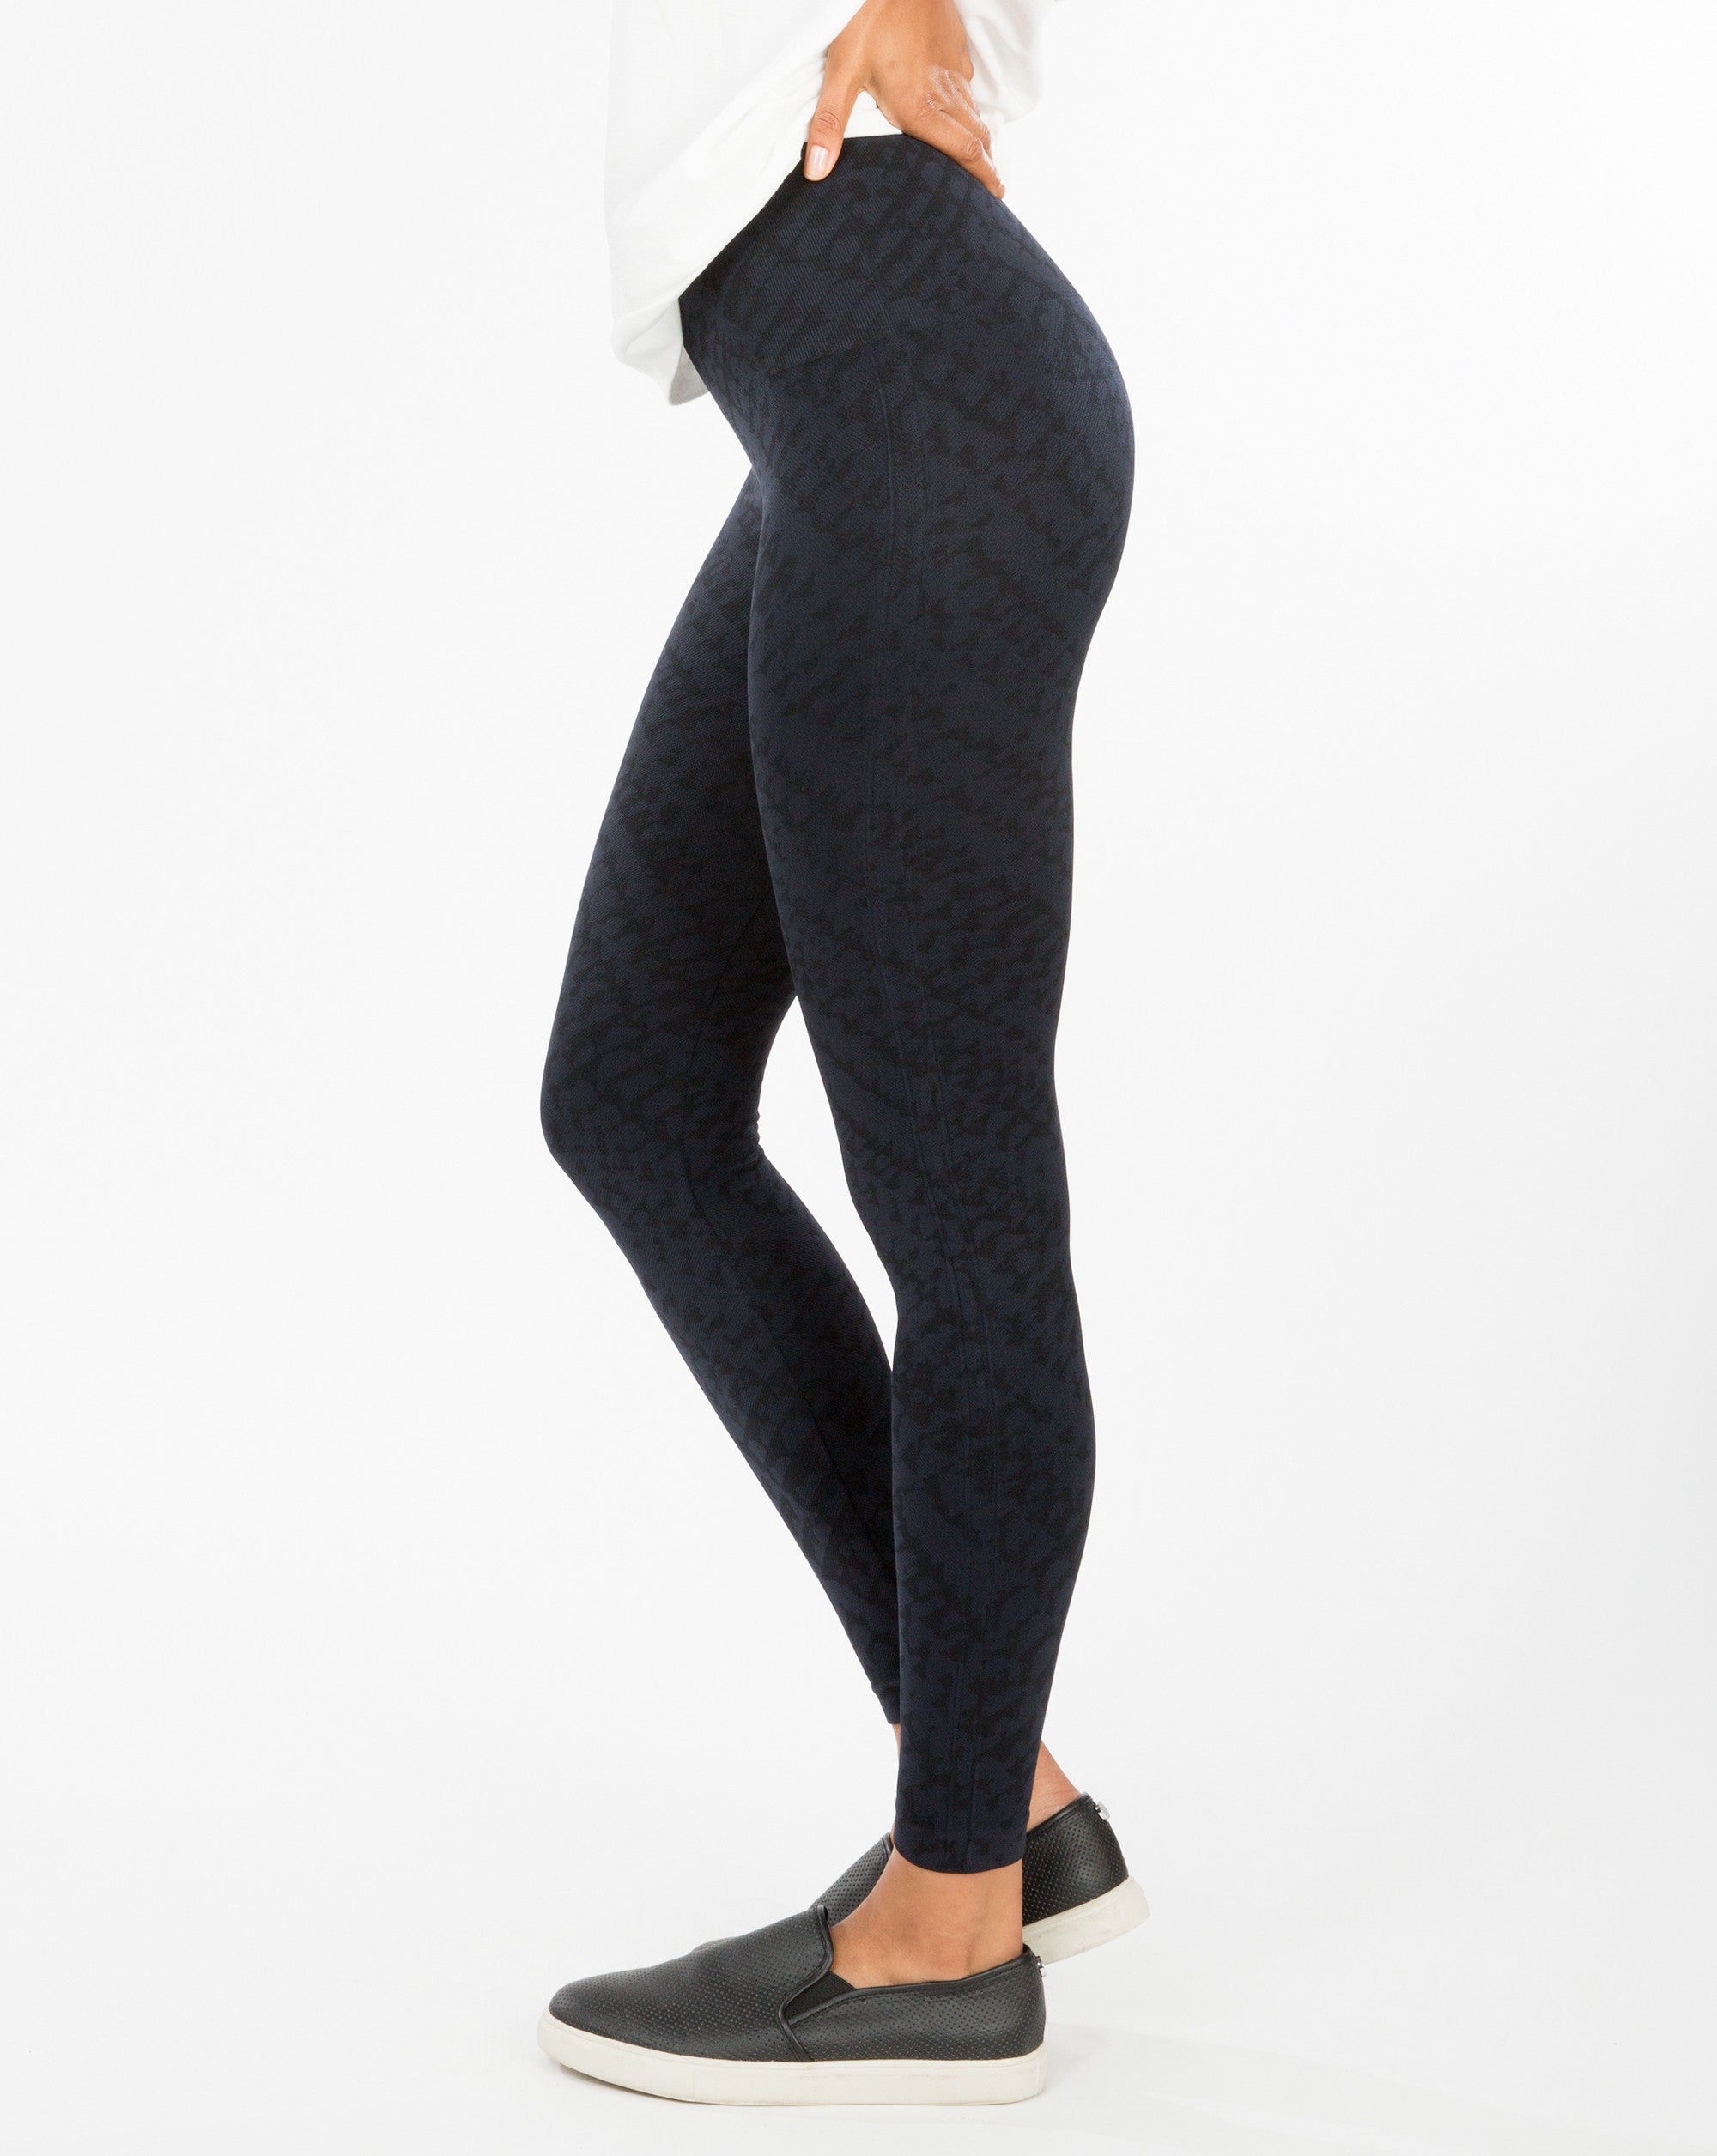 SPANX - Current obsession: Seamless leggings! Our Look At Me Now